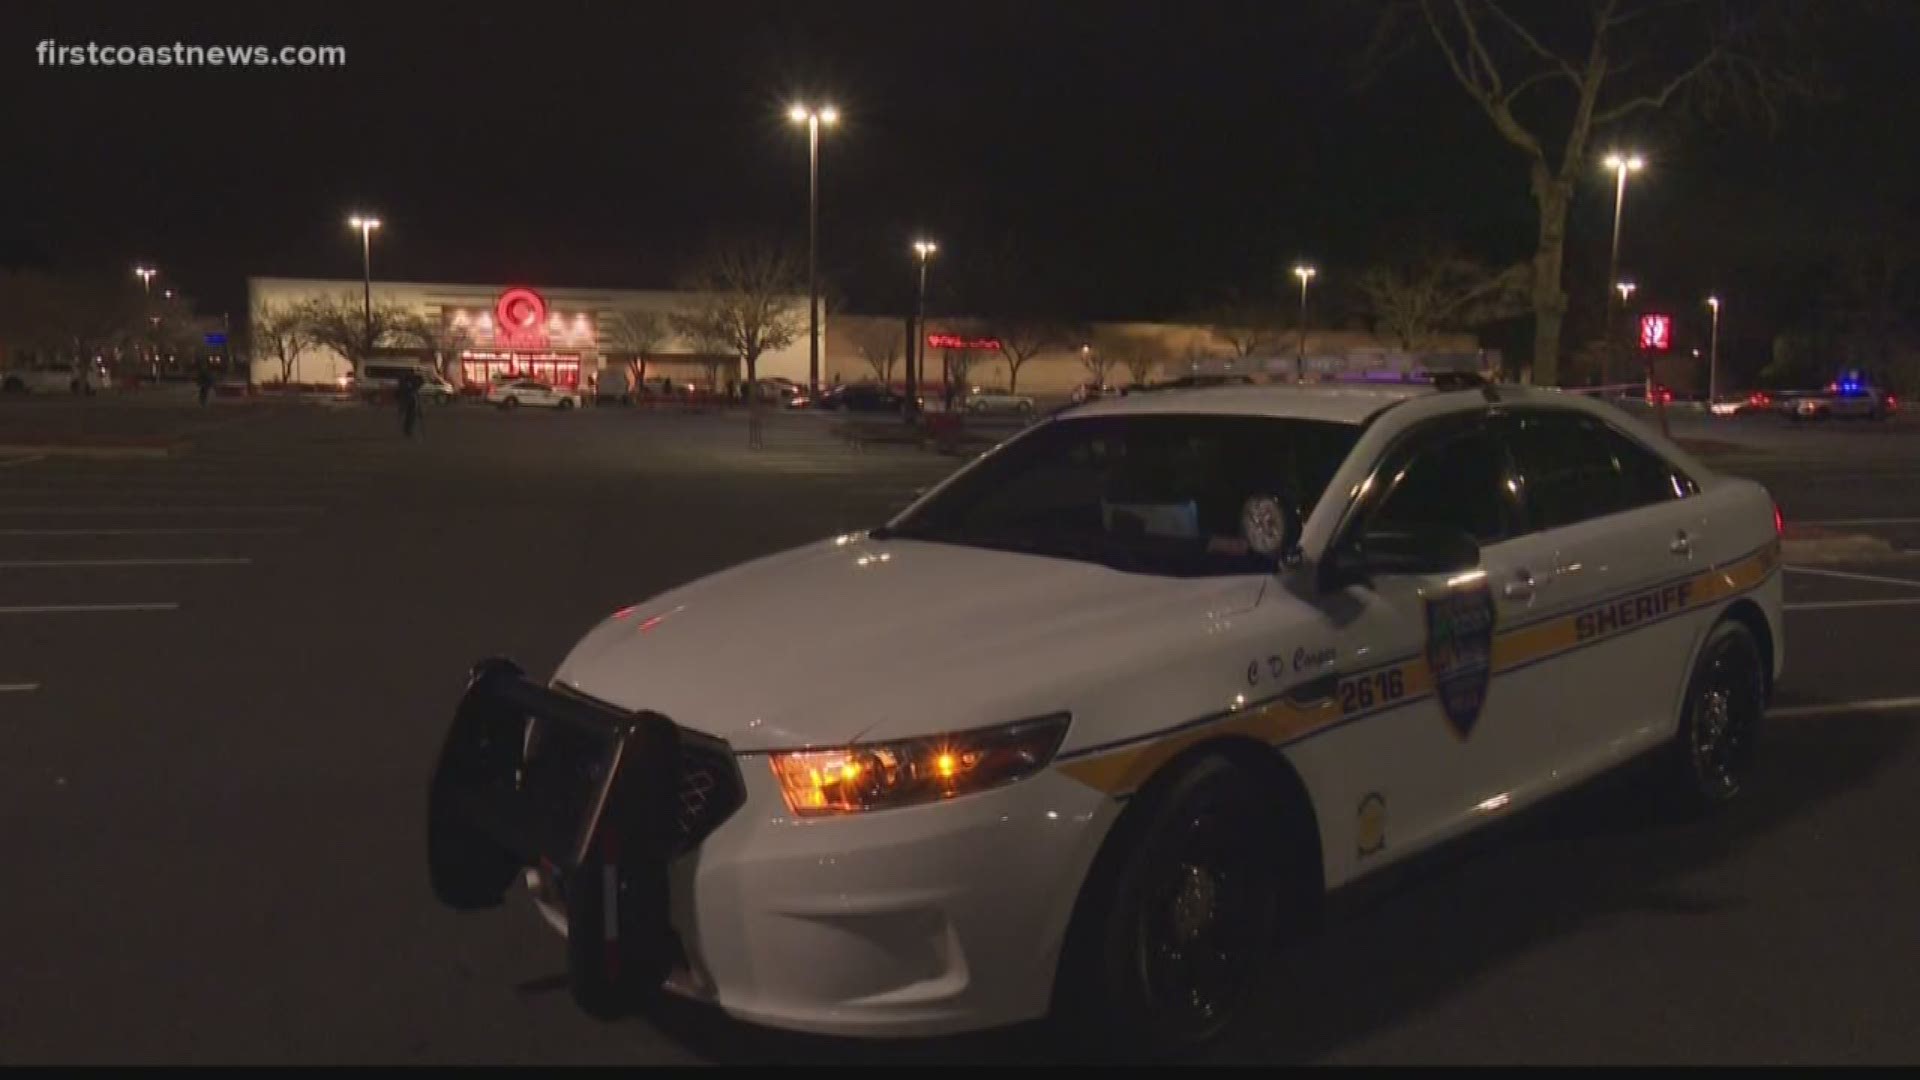 Officers were called to the Target near the Regency shopping center where they found the victim with a gunshot wound to his hip and injuries to his face.